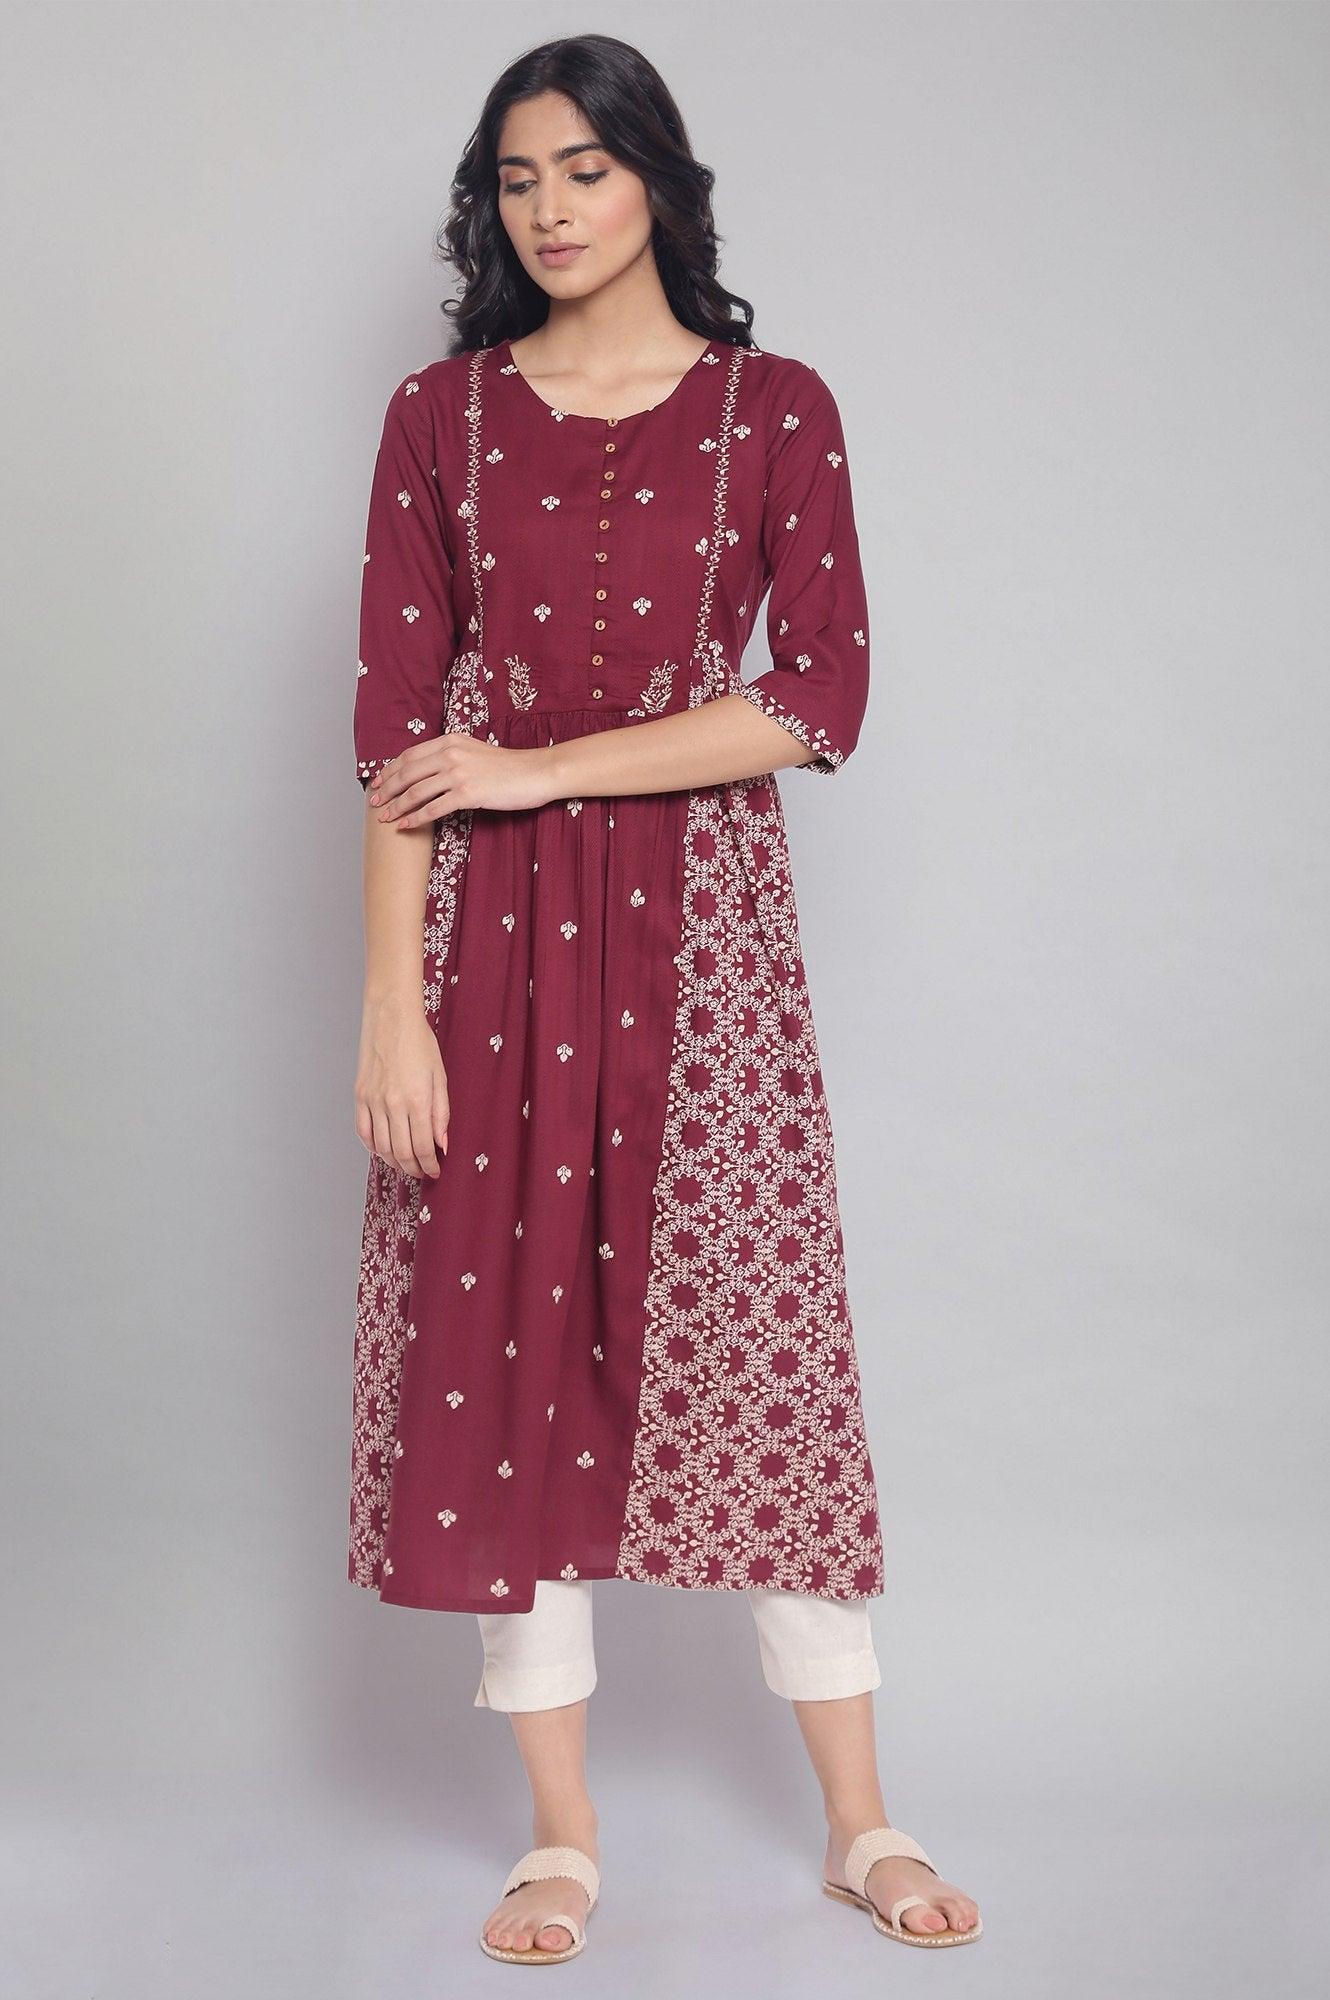 Maroon Flared Gathered Dress with Embroidery - wforwoman